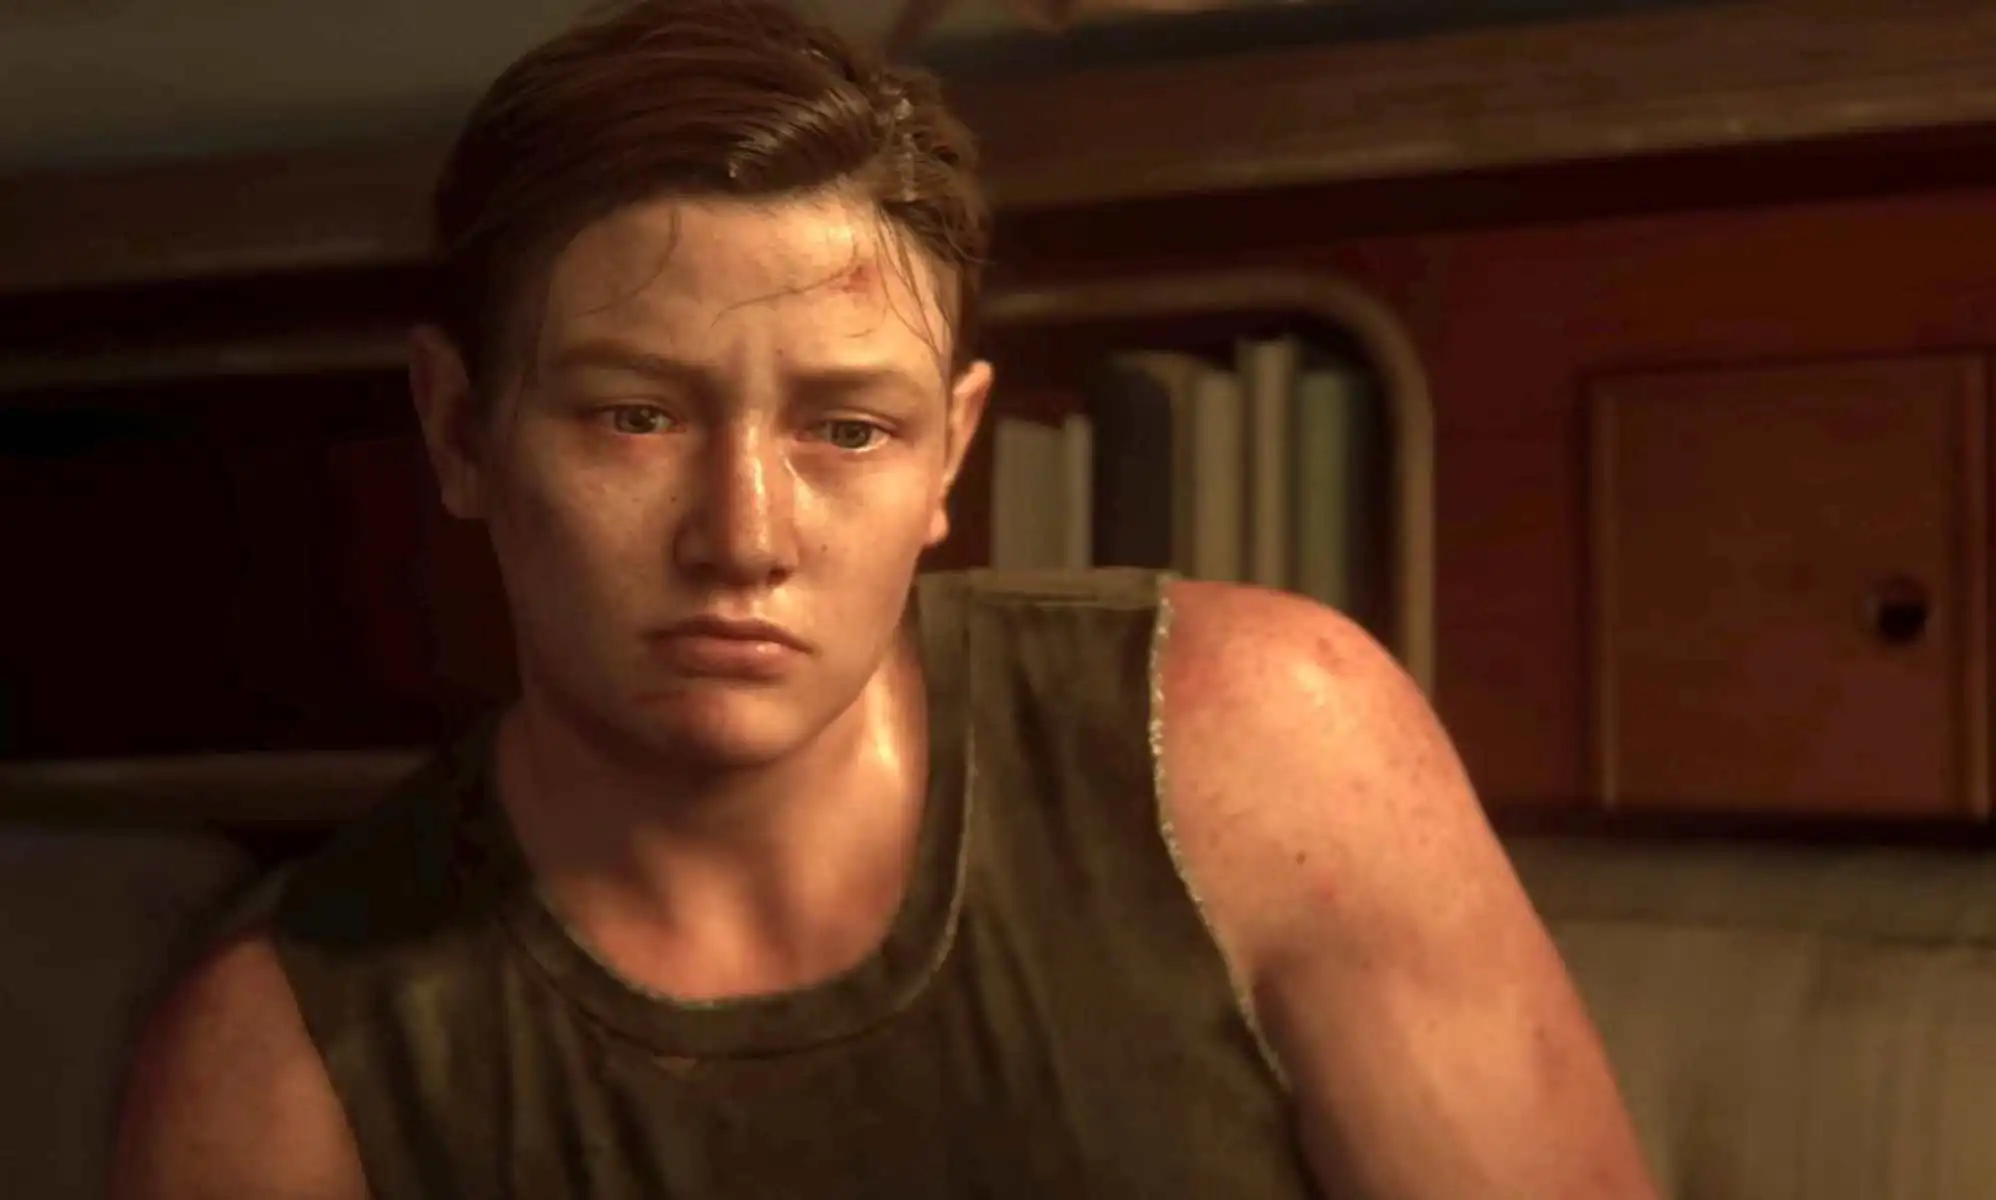 The Last of Us Part II director abused over Abby twist and trans character